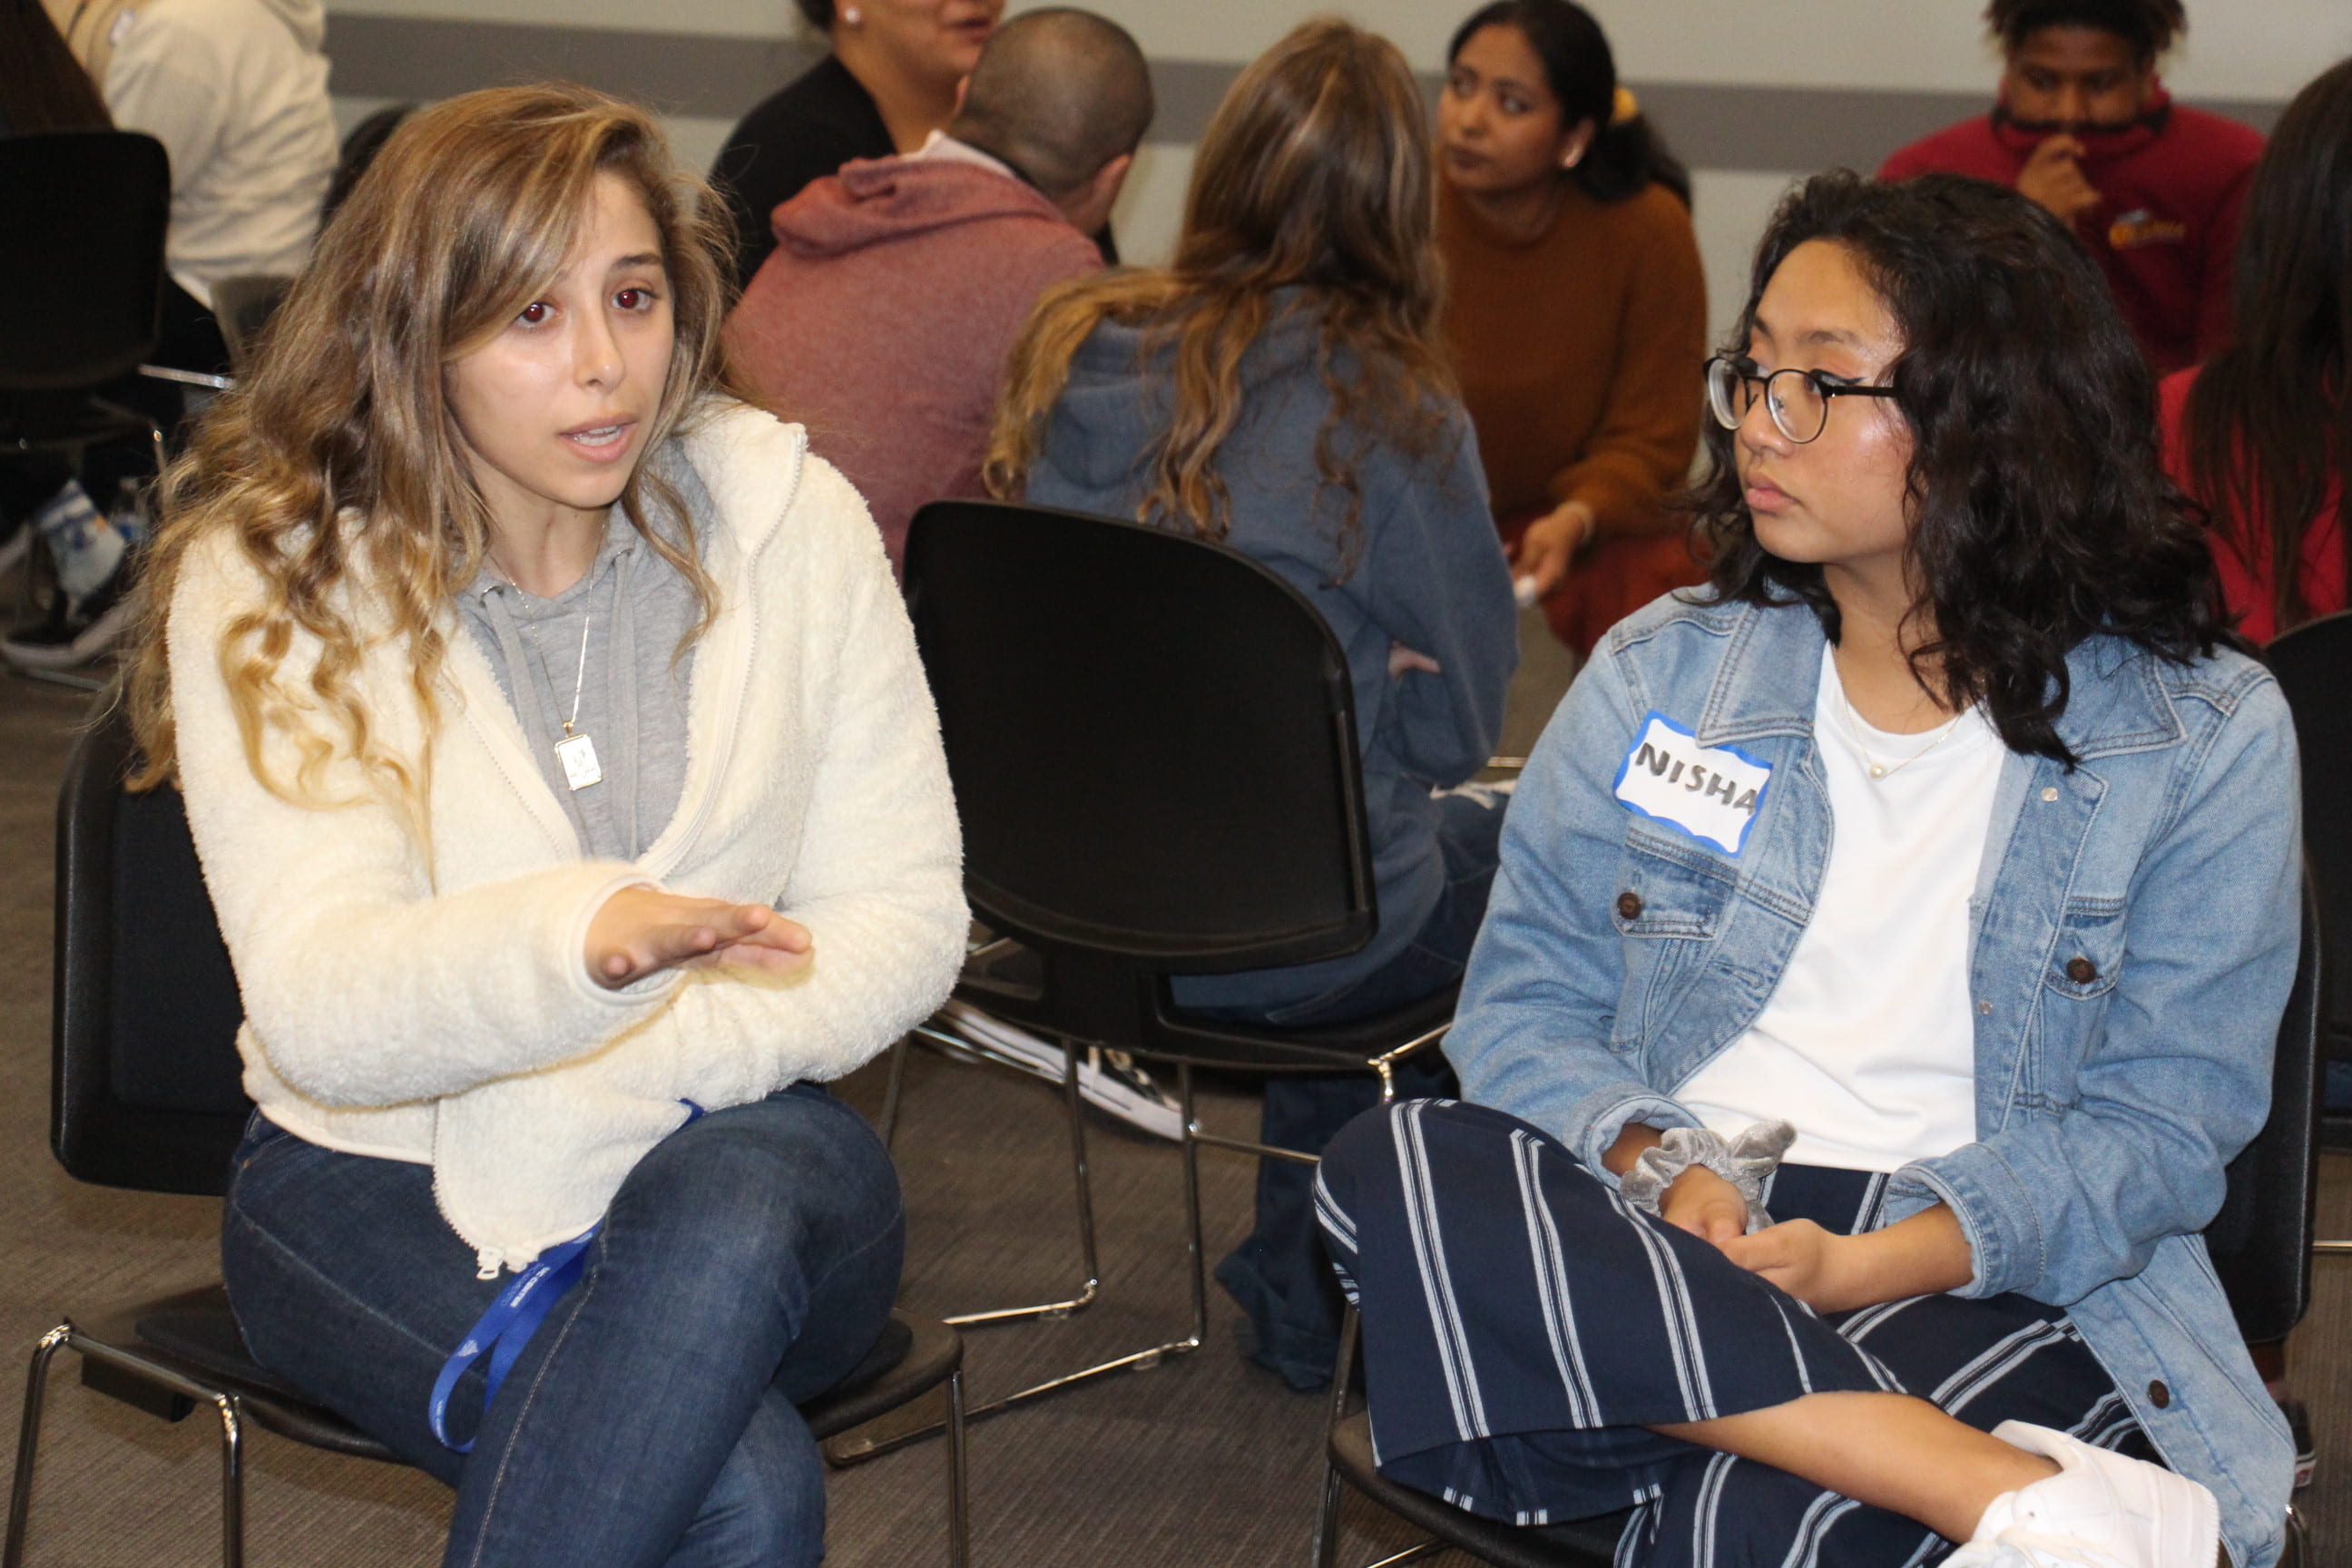 Nora Beik (left), an international studies and political science major at UCI and a student leader in the Diversity, Inclusion & Racial Healing Ambassador Program, chats with a local high schooler.